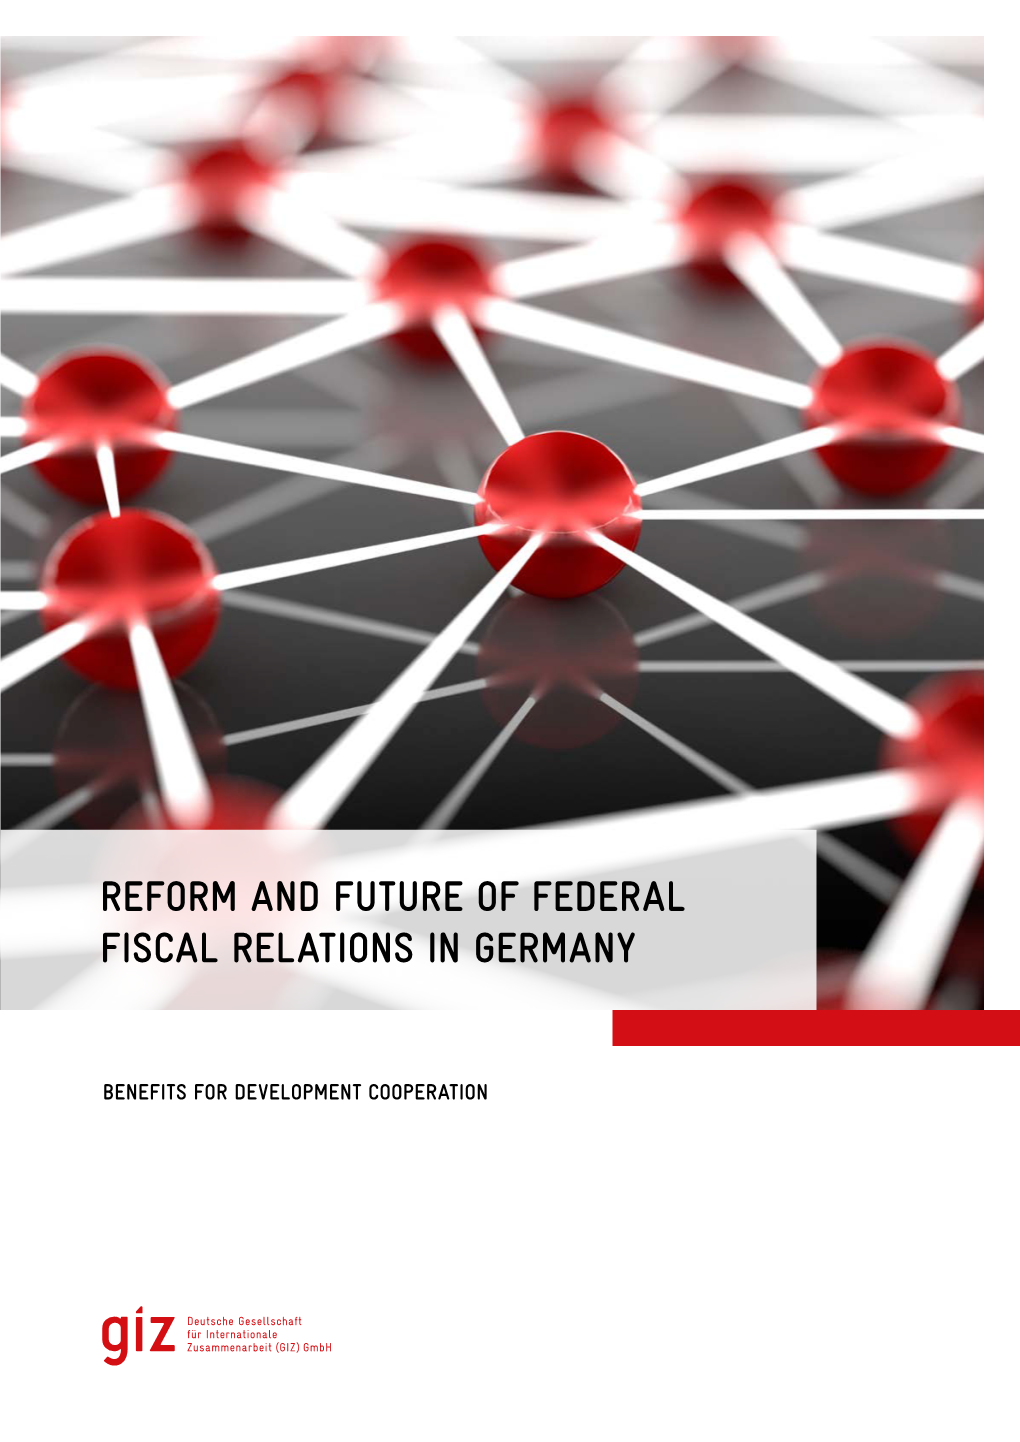 Reform and Future of Federal Fiscal Relations in Germany